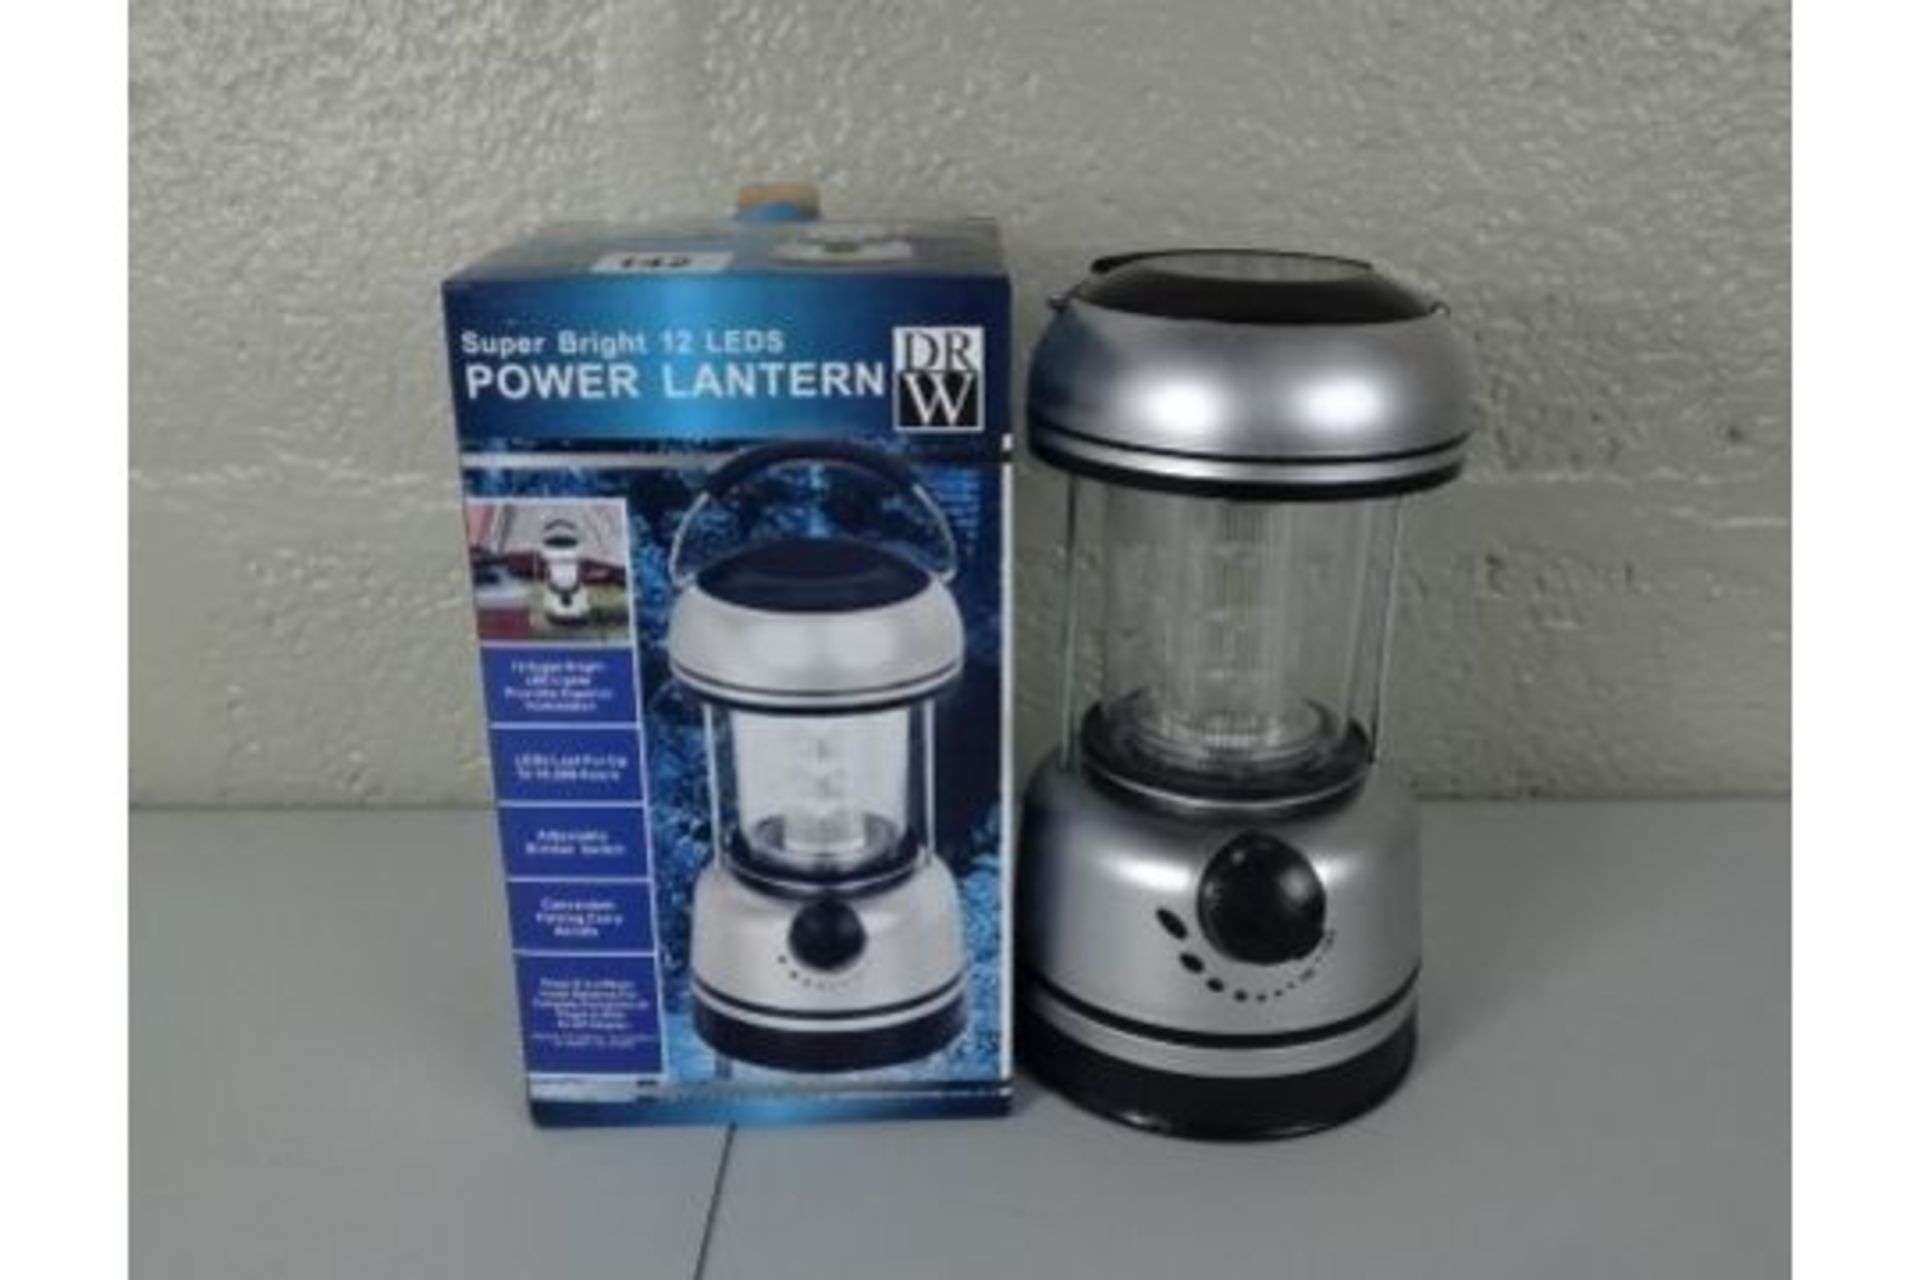 New Super Bright 12 LED Power Lantern (Batteries Not Included)